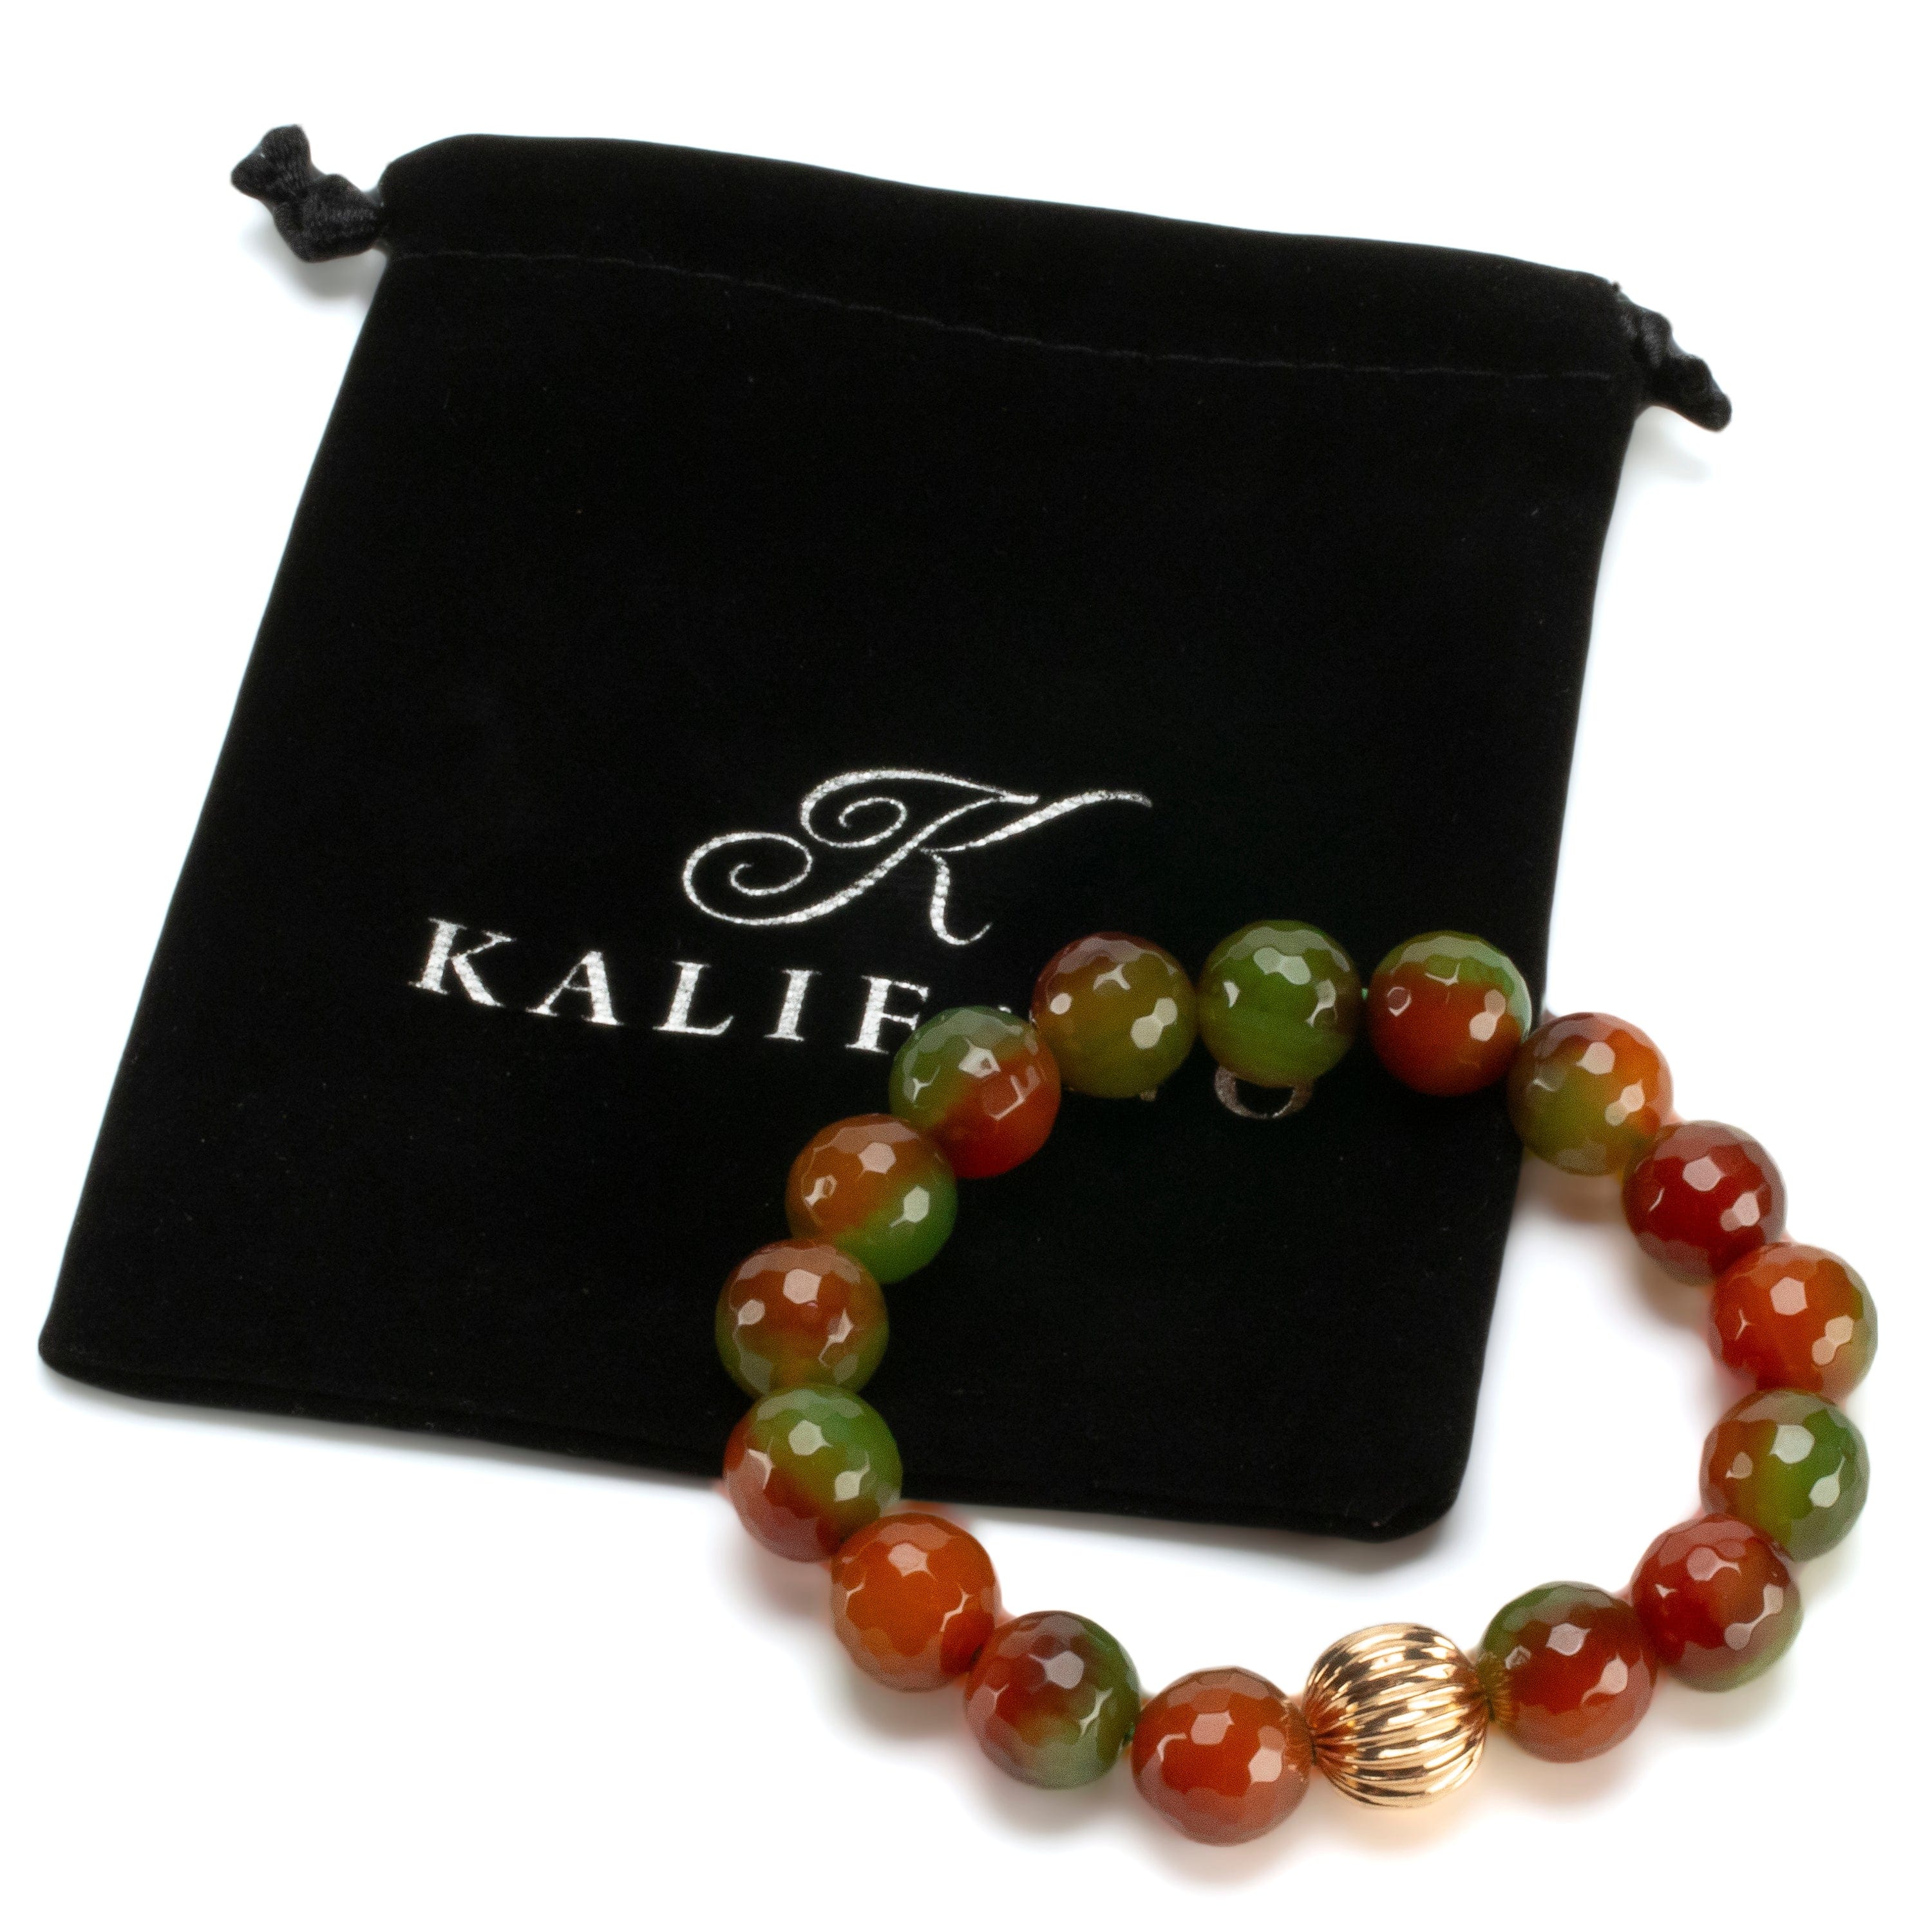 Kalifano Gemstone Bracelets Faceted Agate 12mm Gemstone Bead Elastic Bracelet with Gold Accent Bead GOLD-BGP-076